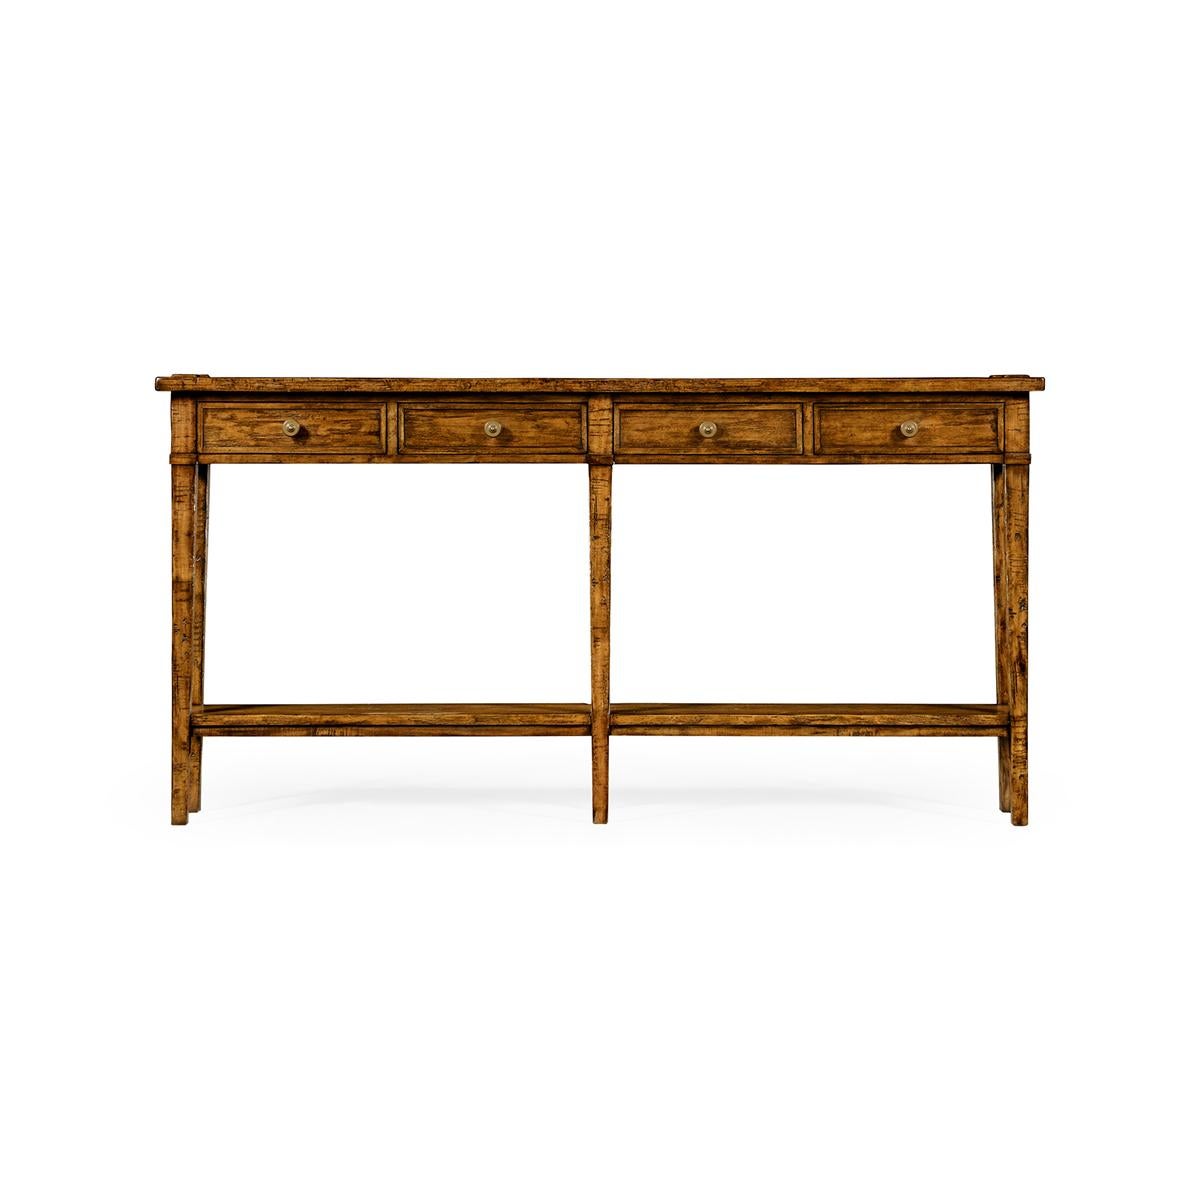 Long narrow country console. This rectangular hall table has a rustic country finish with a paneled top showing exposed saw marks above four drawers set on square tapered legs with a shelf stretcher base.

Dimensions: 68 1/8